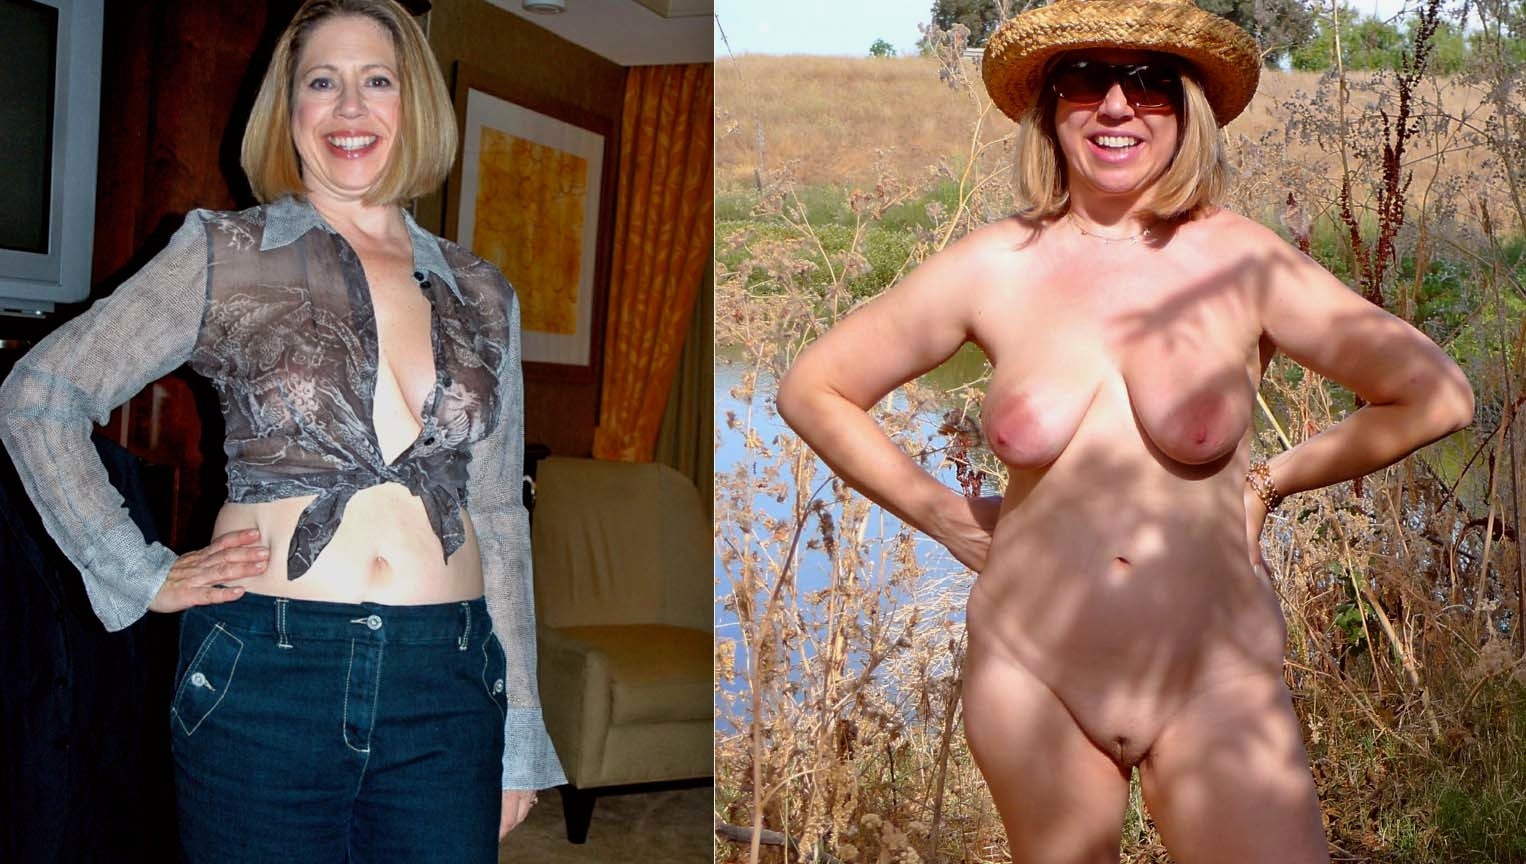 Do you want to compare how a woman looks dressed and undressed? 